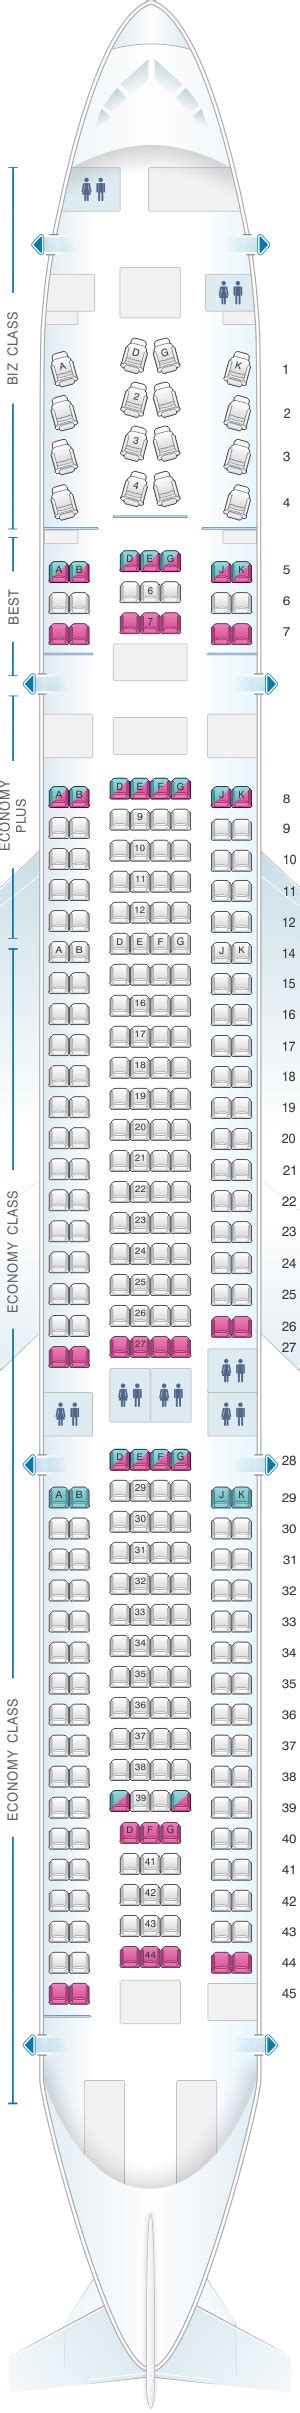 Seat Map Eurowings Airbus A330 300 Seatmaestro